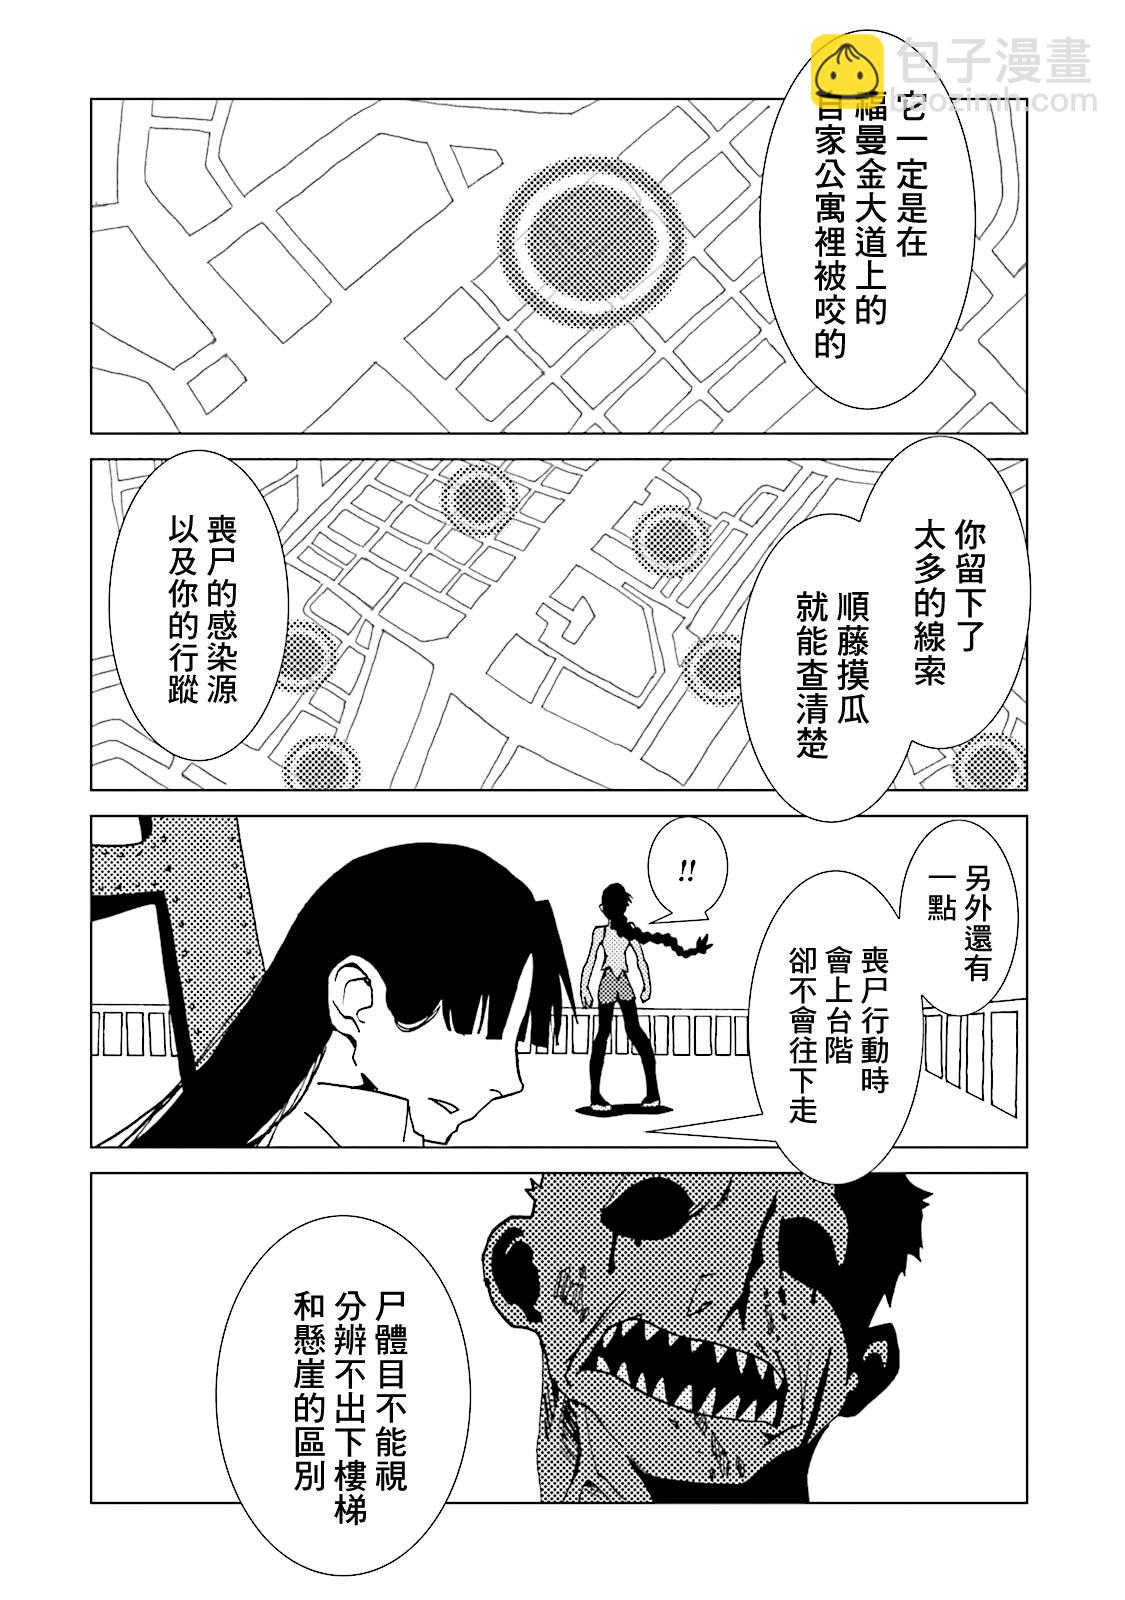 AREA51 - 第64話 - 3